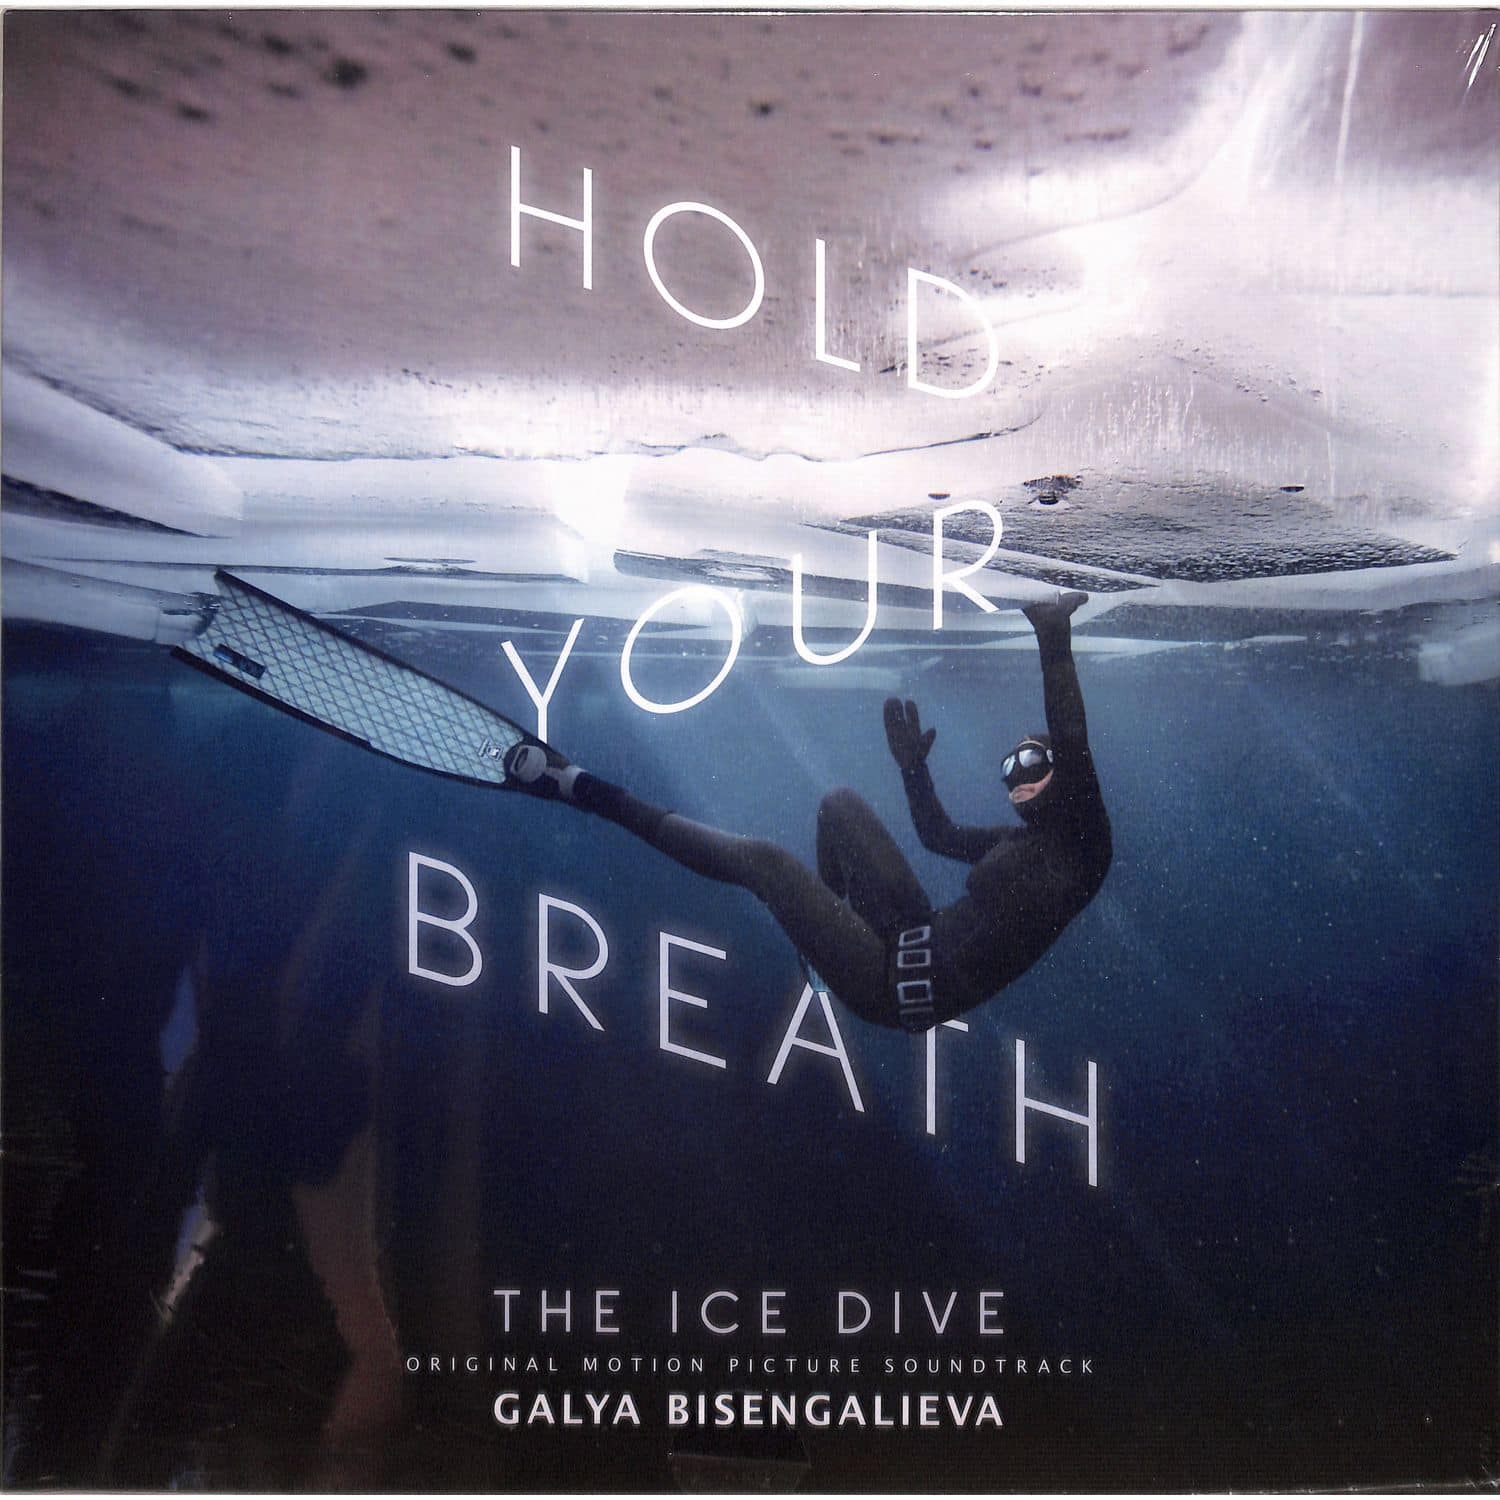 Galya Bisengalieva - HOLD YOUR BREATH: THE ICE DIVE O.S.T. 